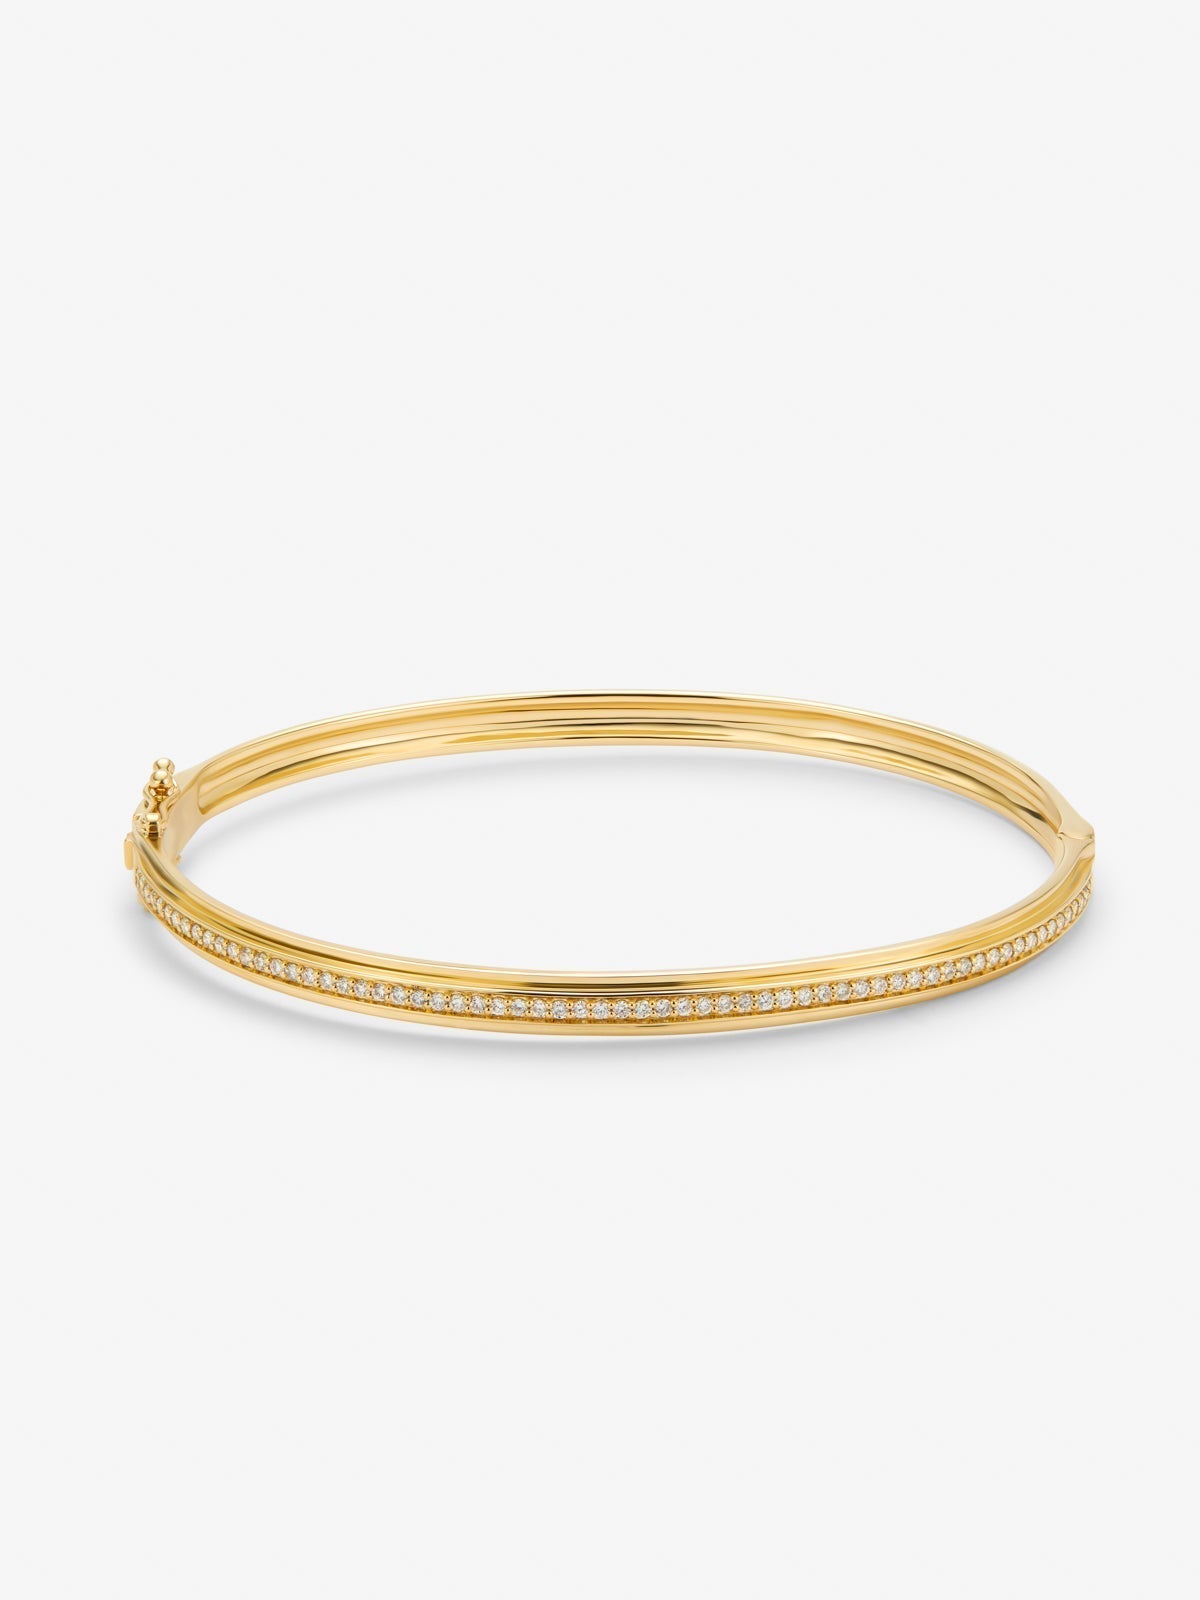 Rigid 18K yellow gold bracelet with 64 brilliant-cut diamonds with a total of 0.38 cts